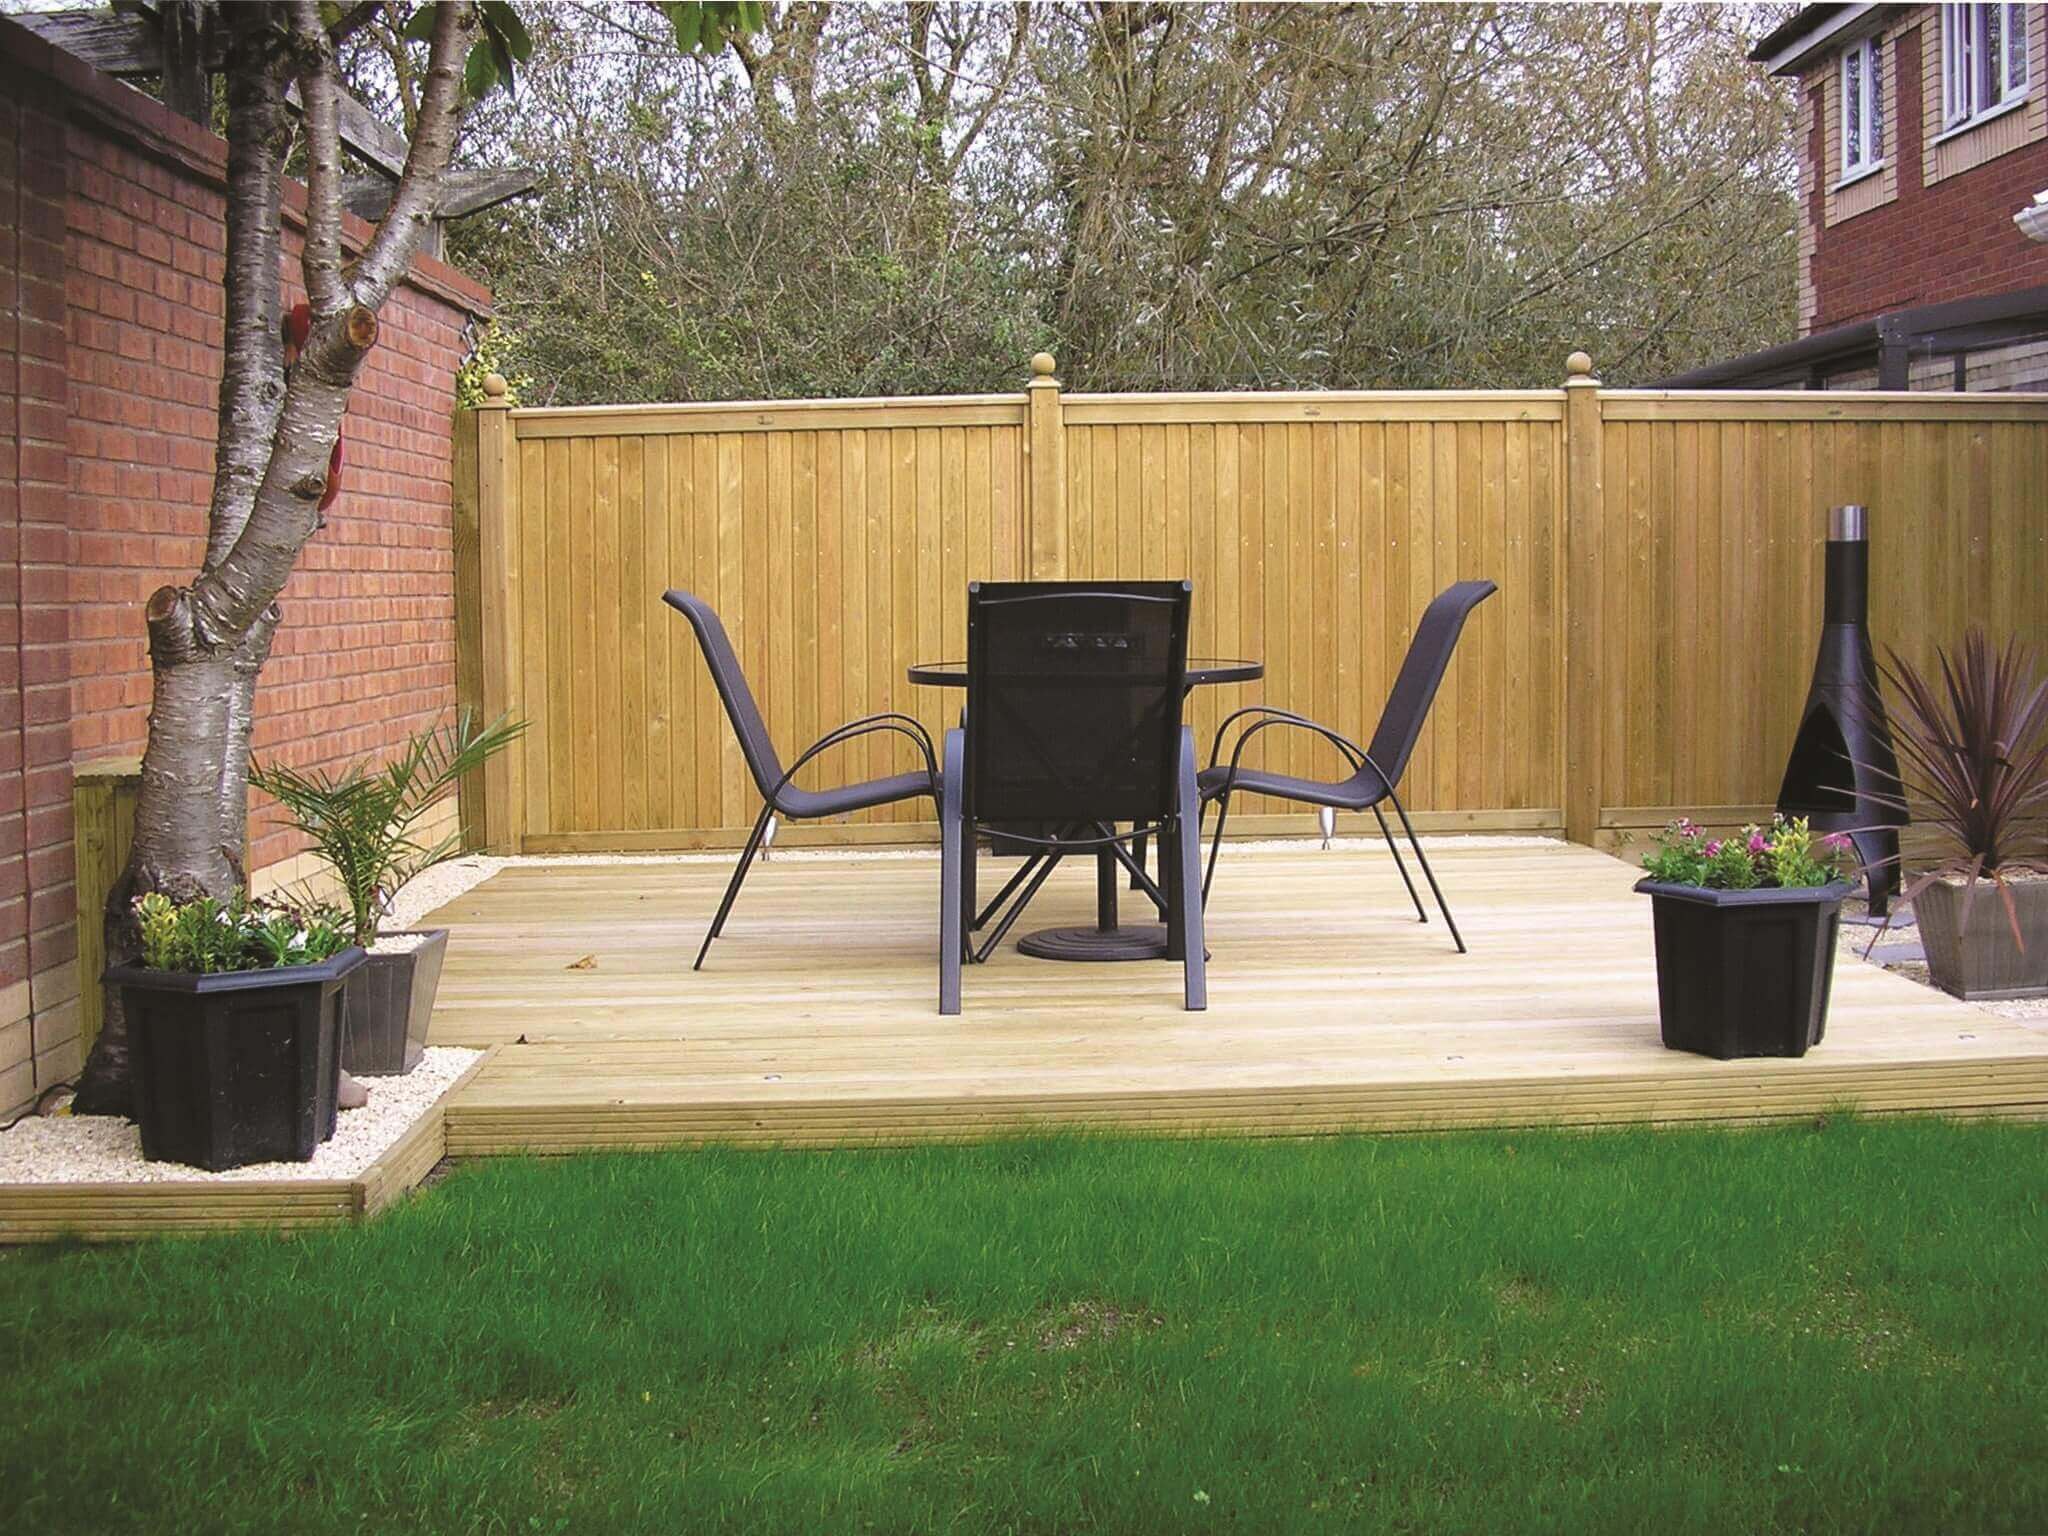 Tongue and Groove effect panels and decking